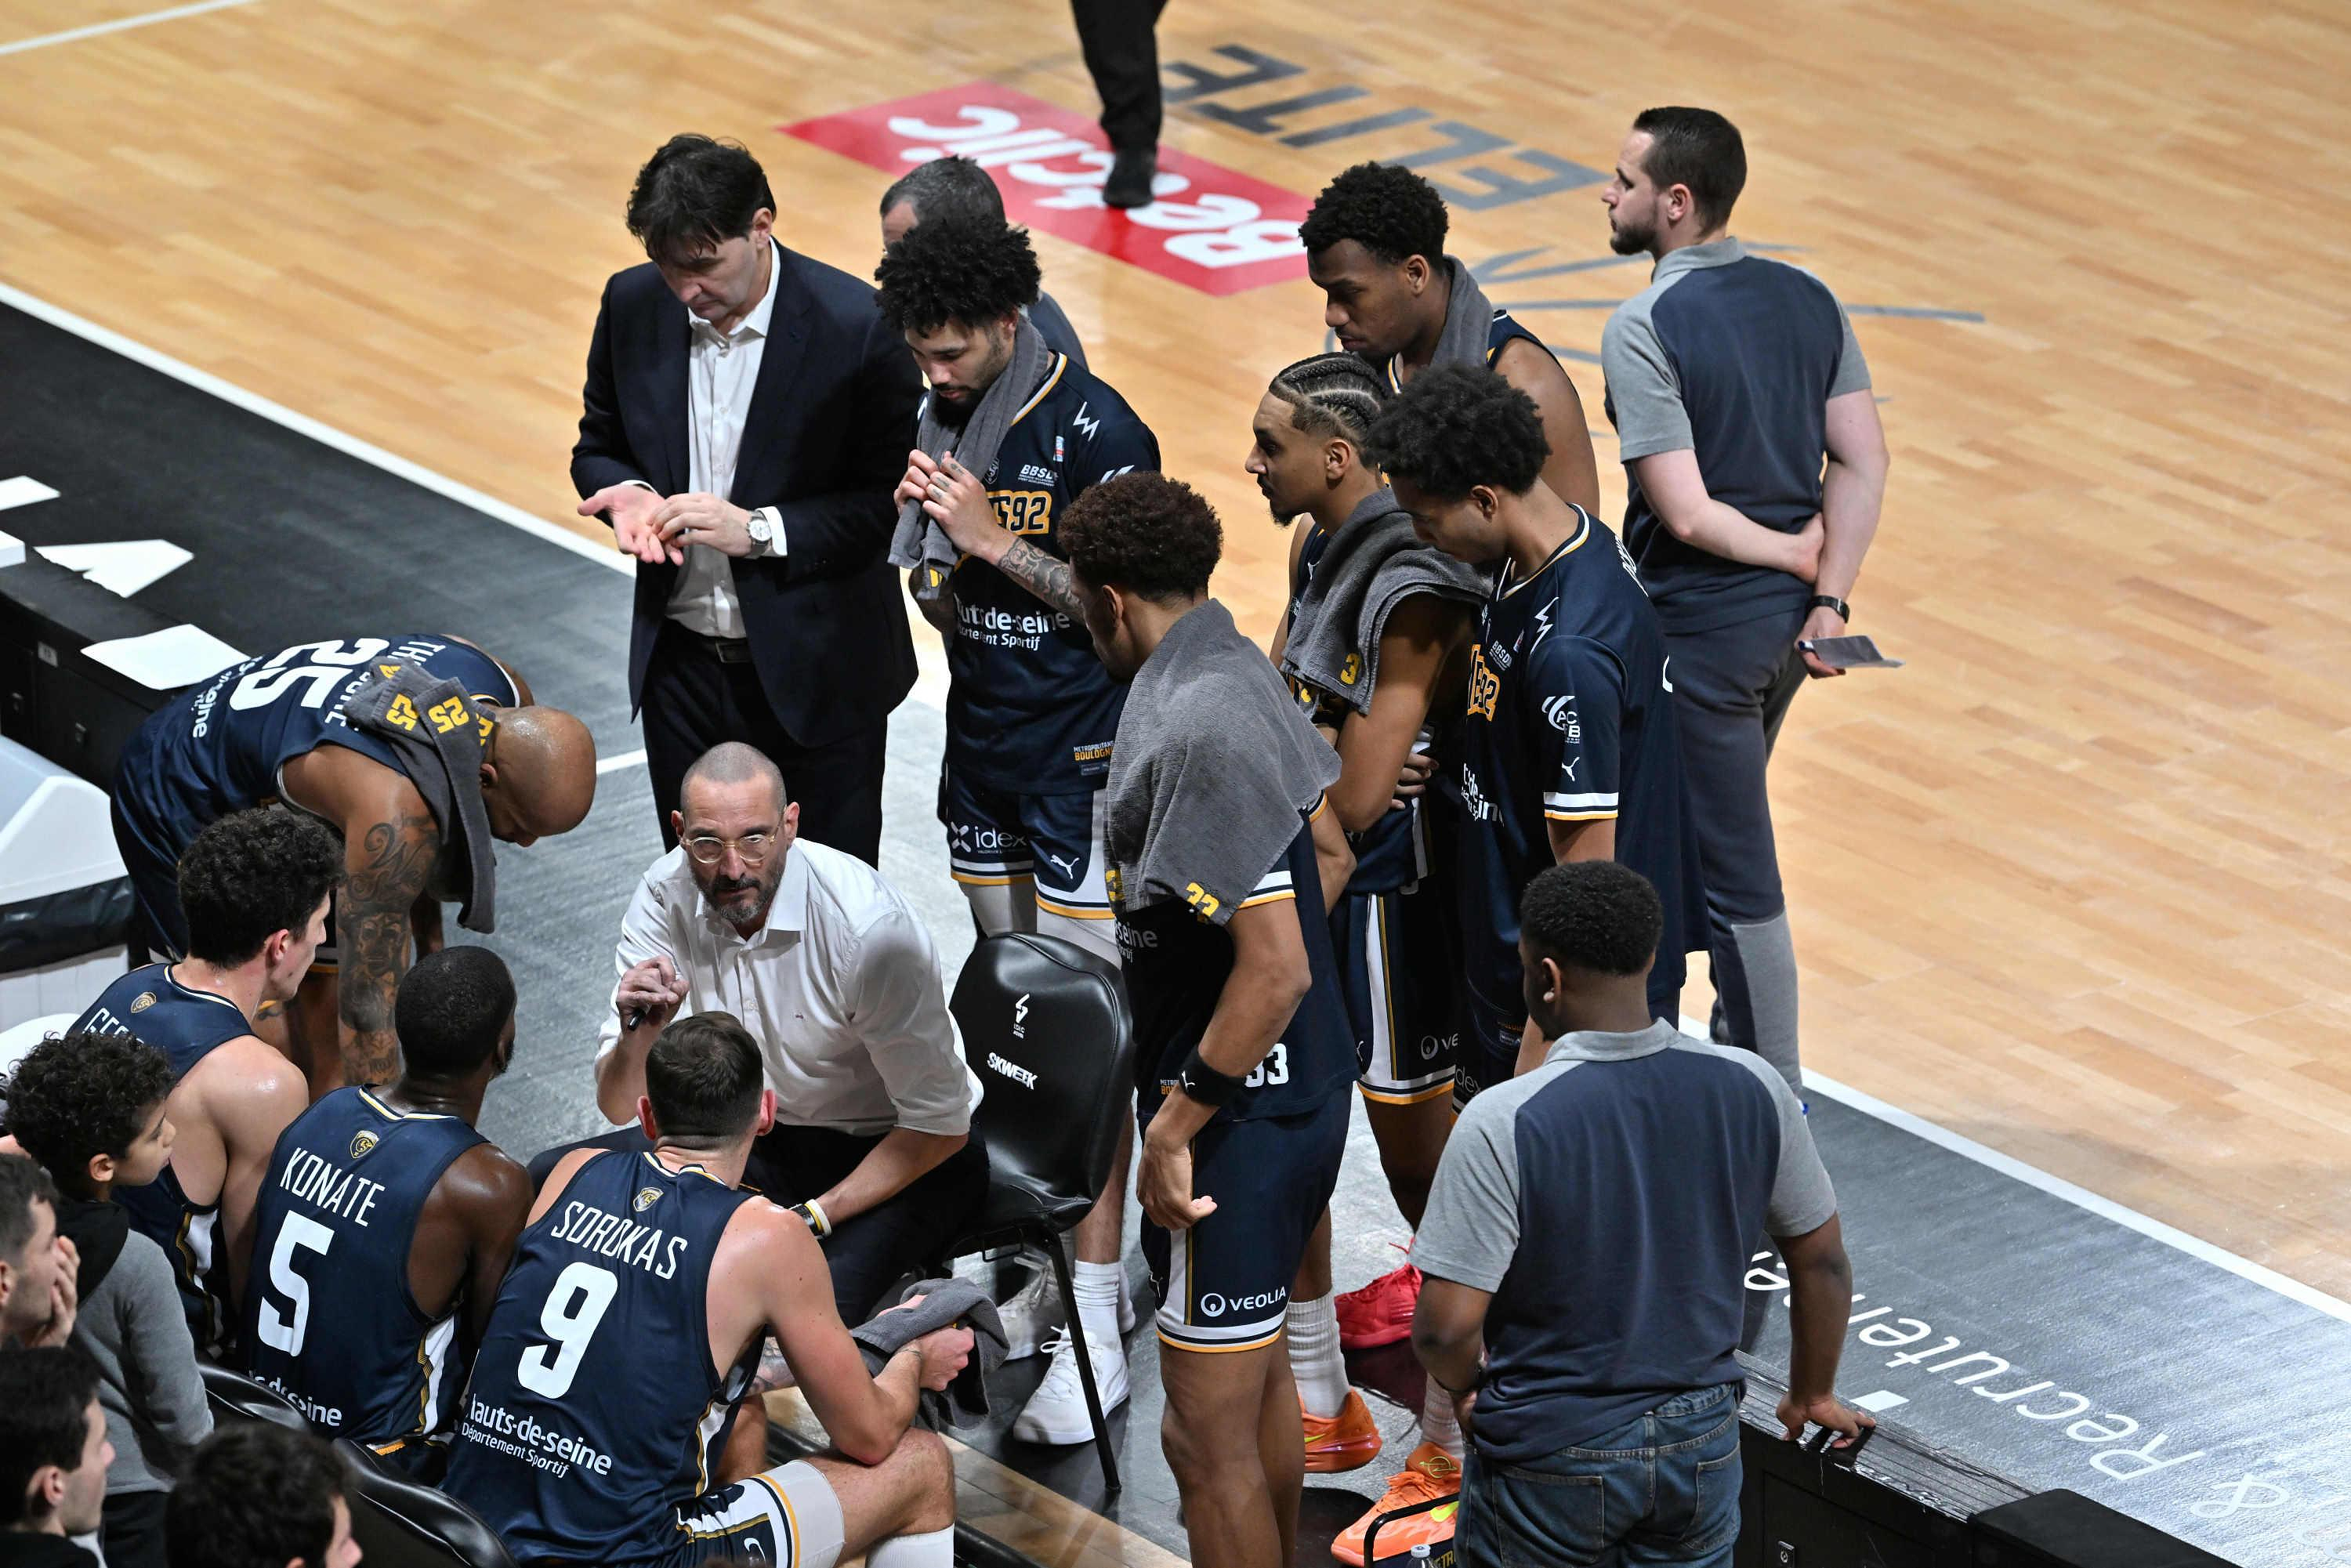 Basketball: one year after “Wembamania”, Boulogne-Levallois relegated to Pro B